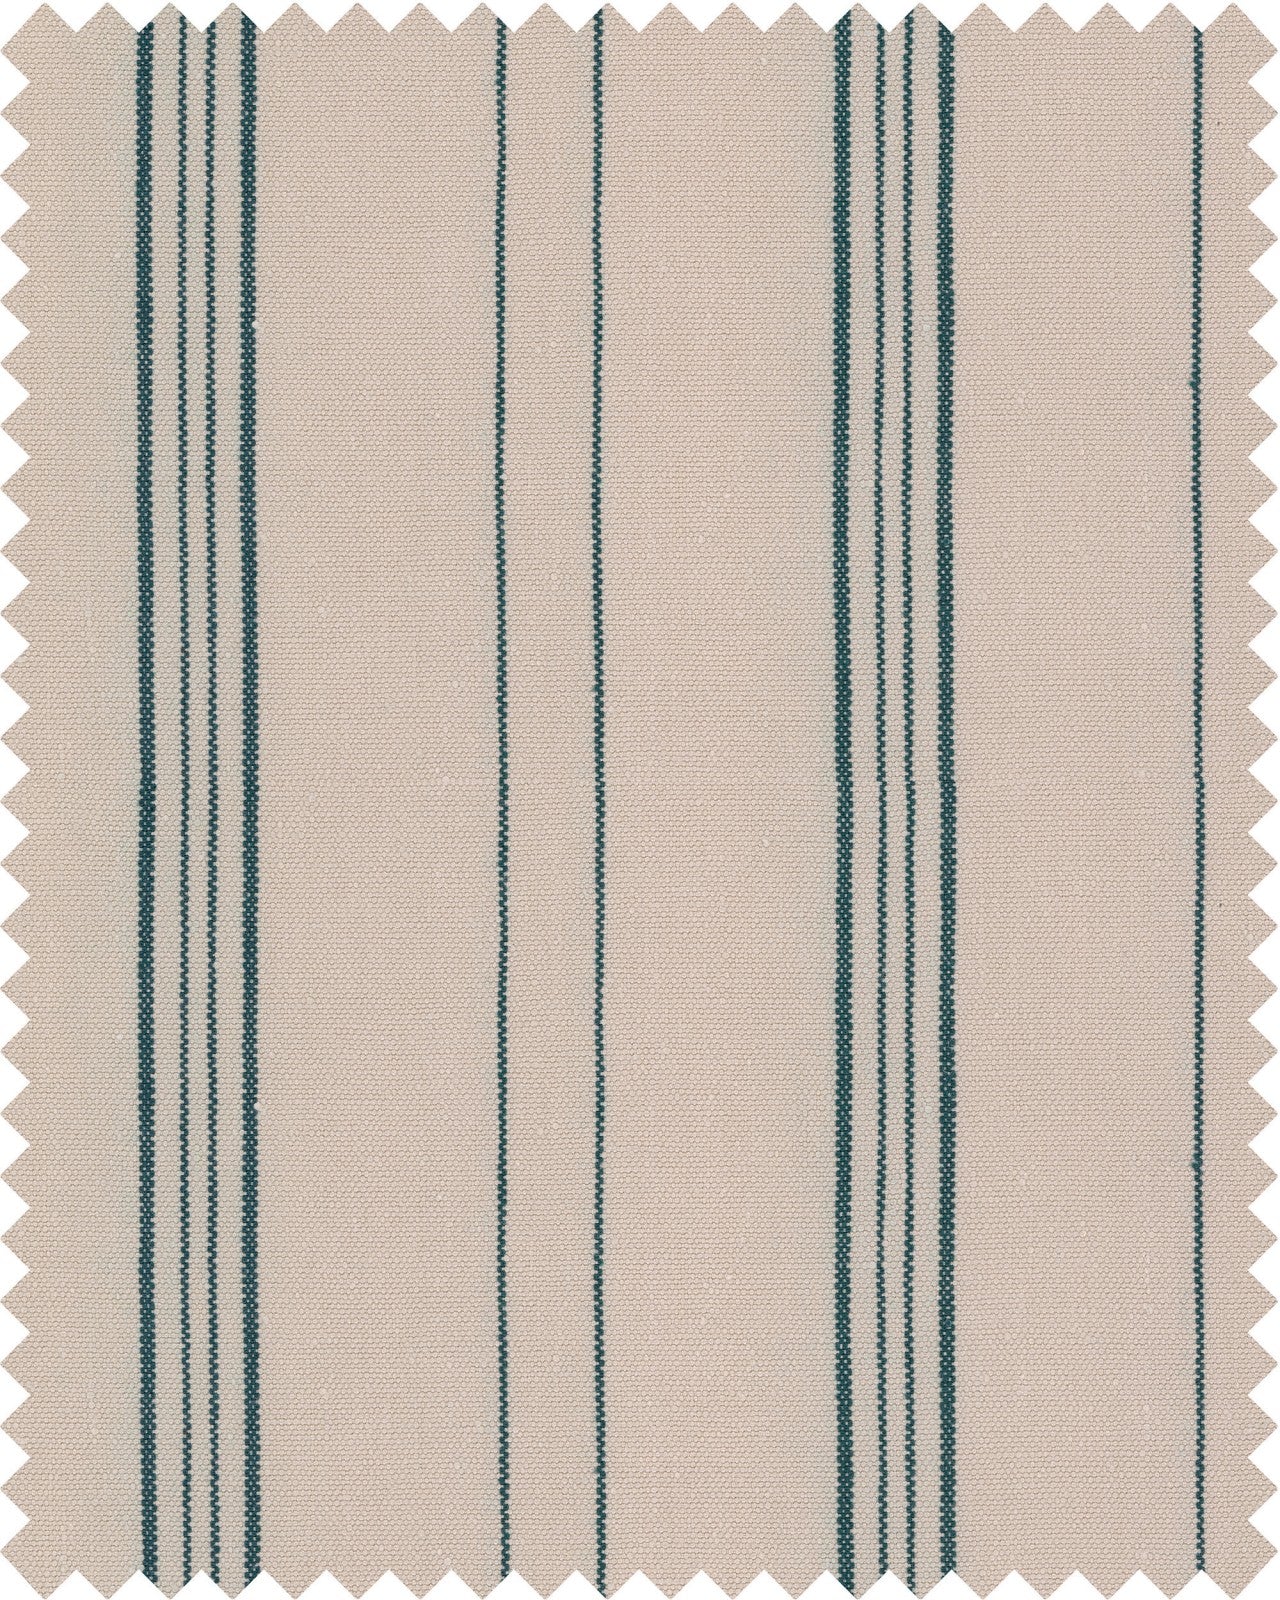 Wichita Stripes Heavy Linen fabric in taupe blue color - pattern number FB00085 - by Mind The Gap in the Woodstock collection